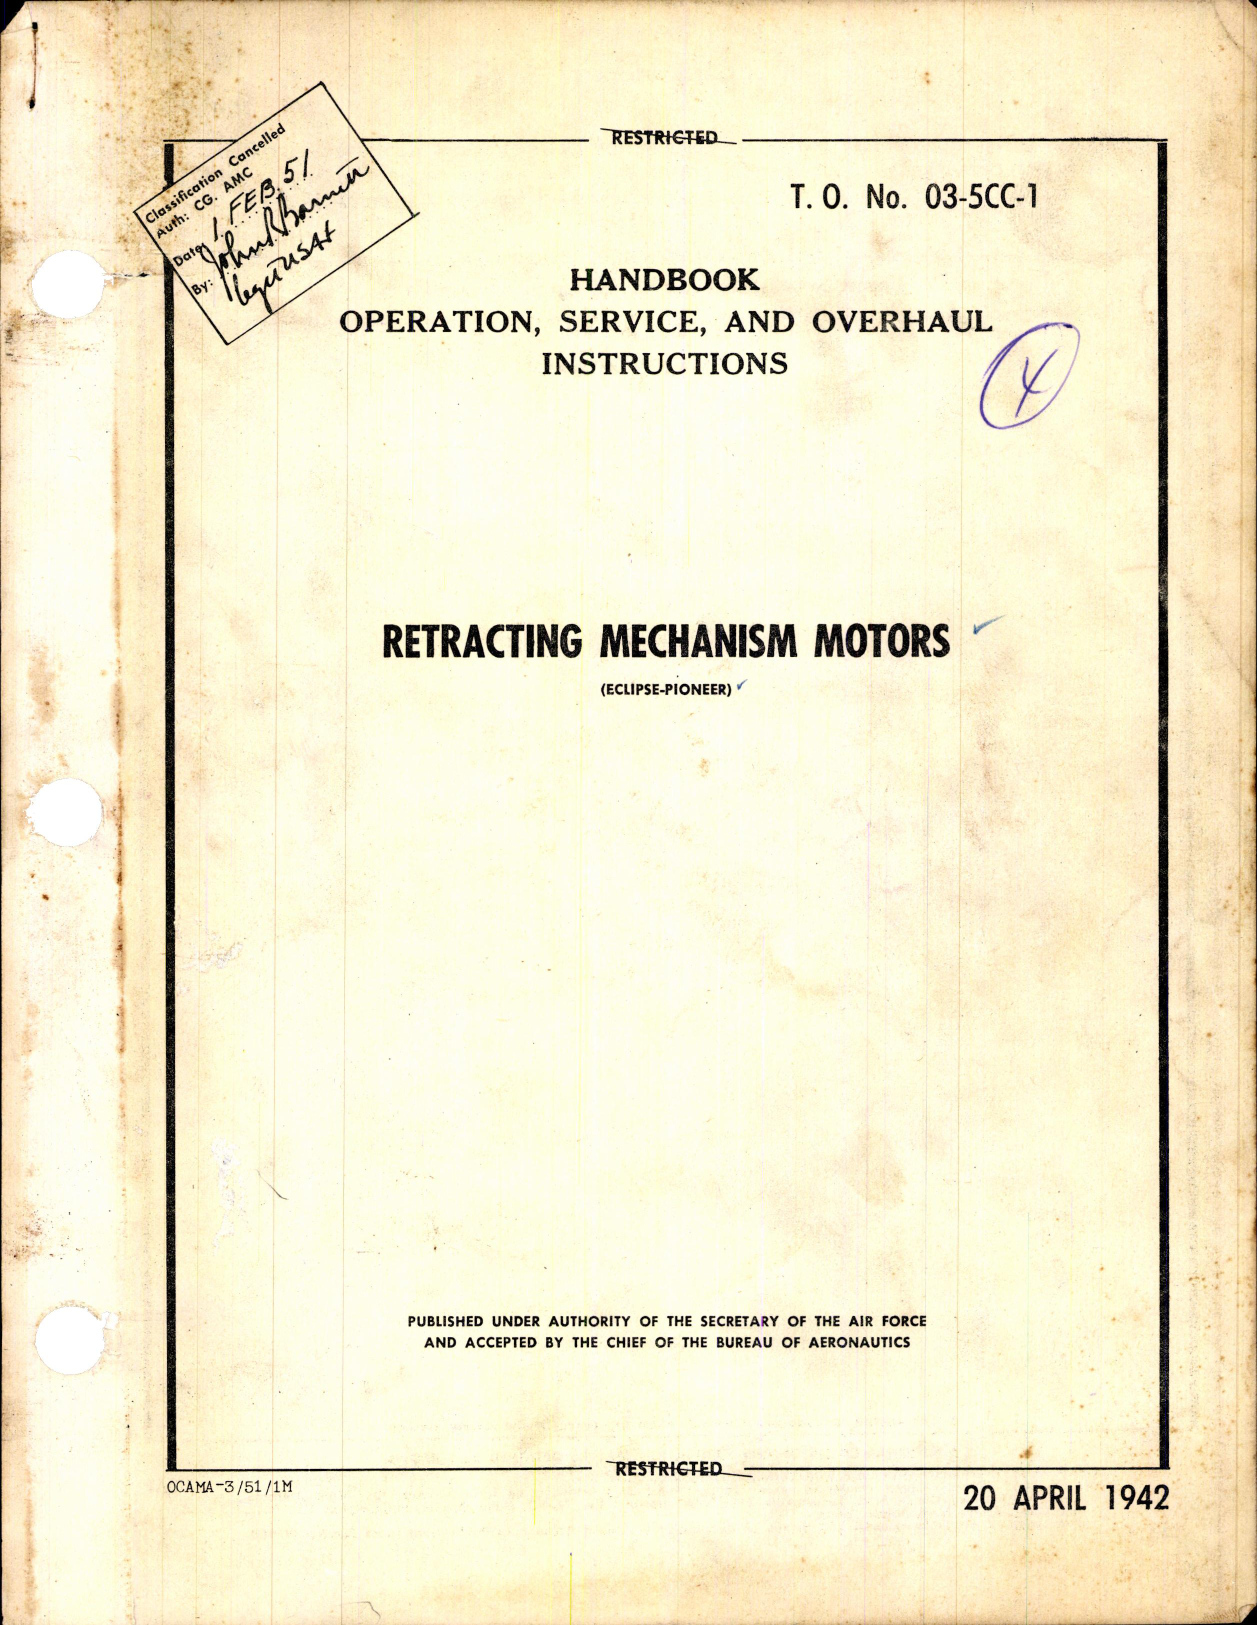 Sample page 1 from AirCorps Library document: Operation, Service, & Overhaul Instructions for Retracting Mechanism Motors